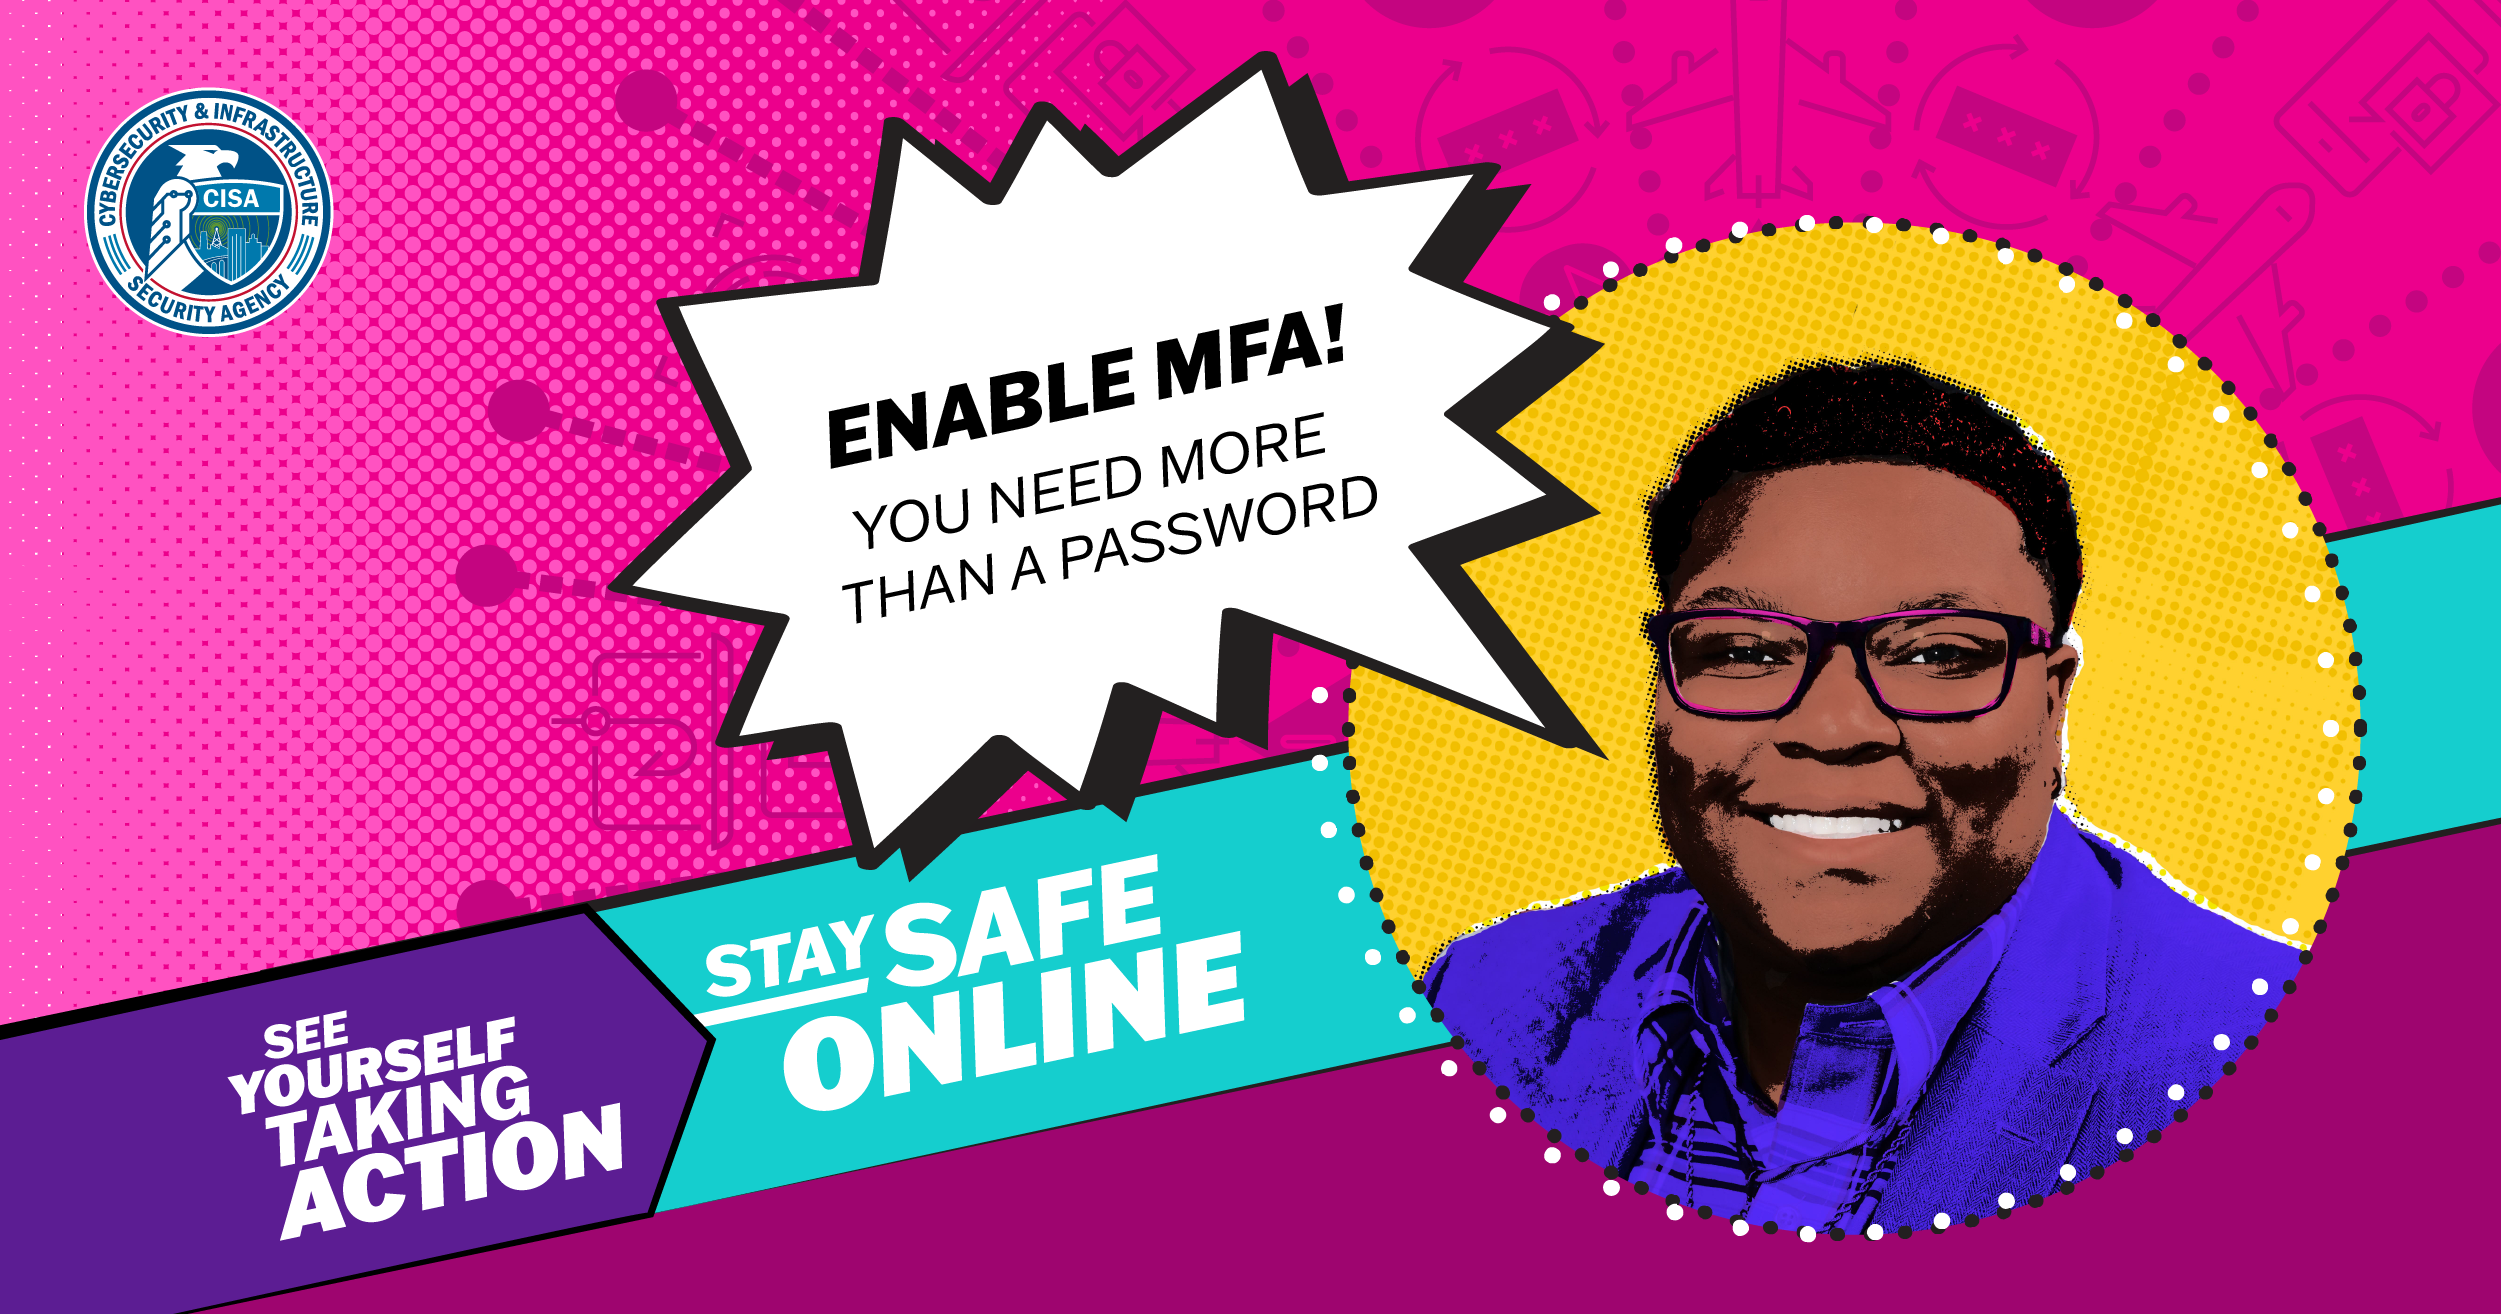 Enable MFA - You Need More Than a Password. See Yourself Taking Action. Stay Safe Online